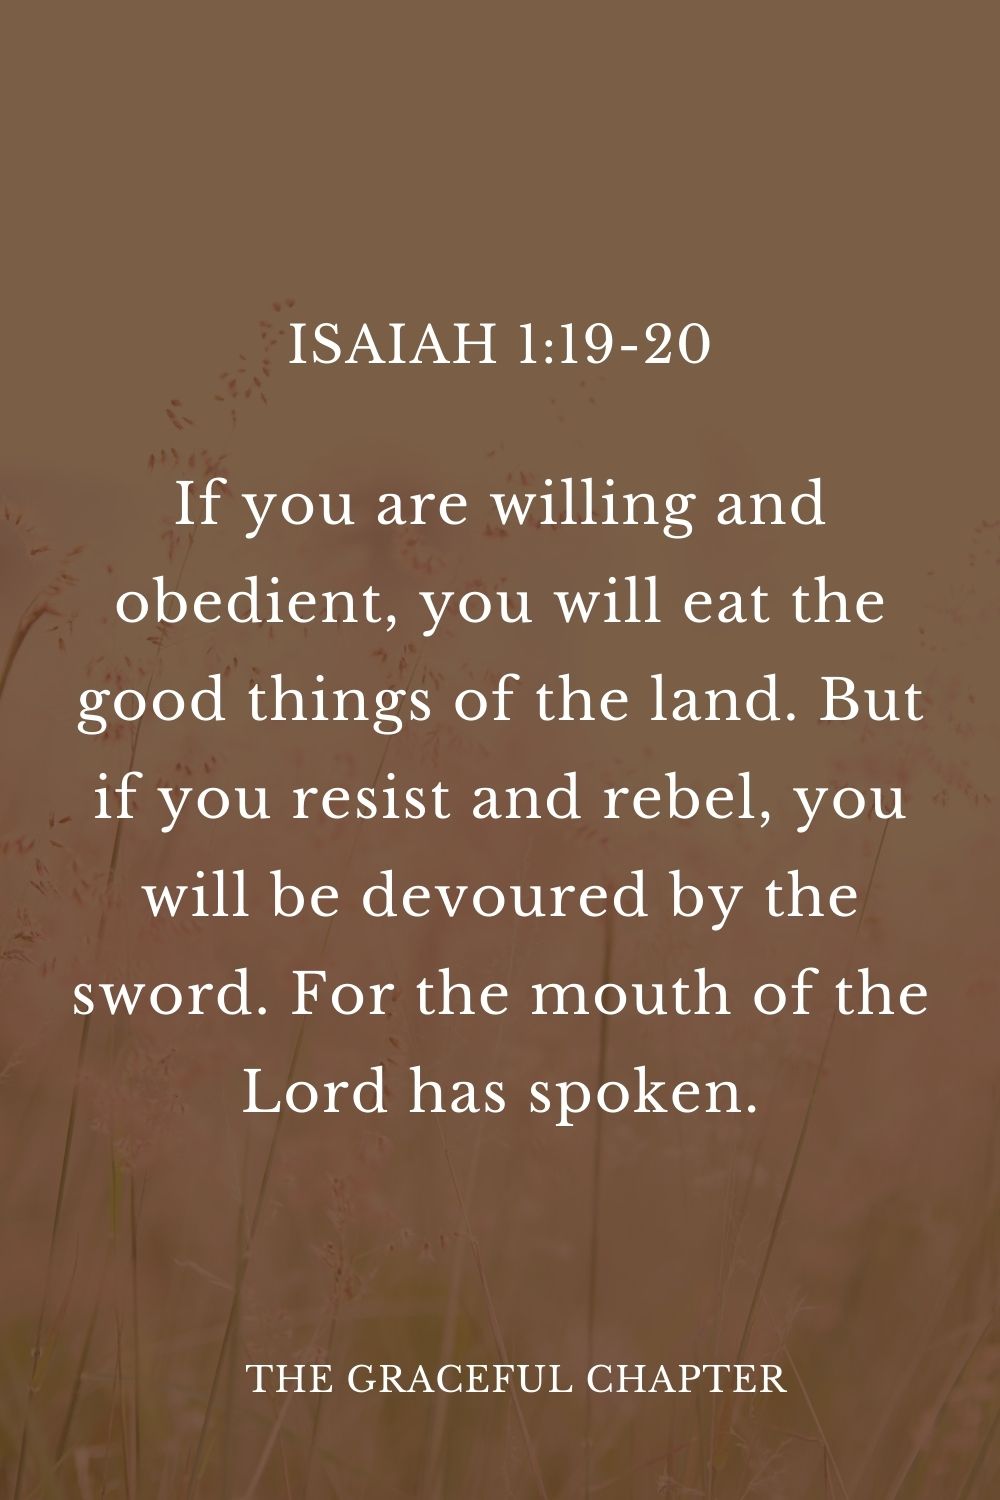 If you are willing and obedient, you will eat the good things of the land. But if you resist and rebel, you will be devoured by the sword. For the mouth of the Lord has spoken. Isaiah 1:19-20